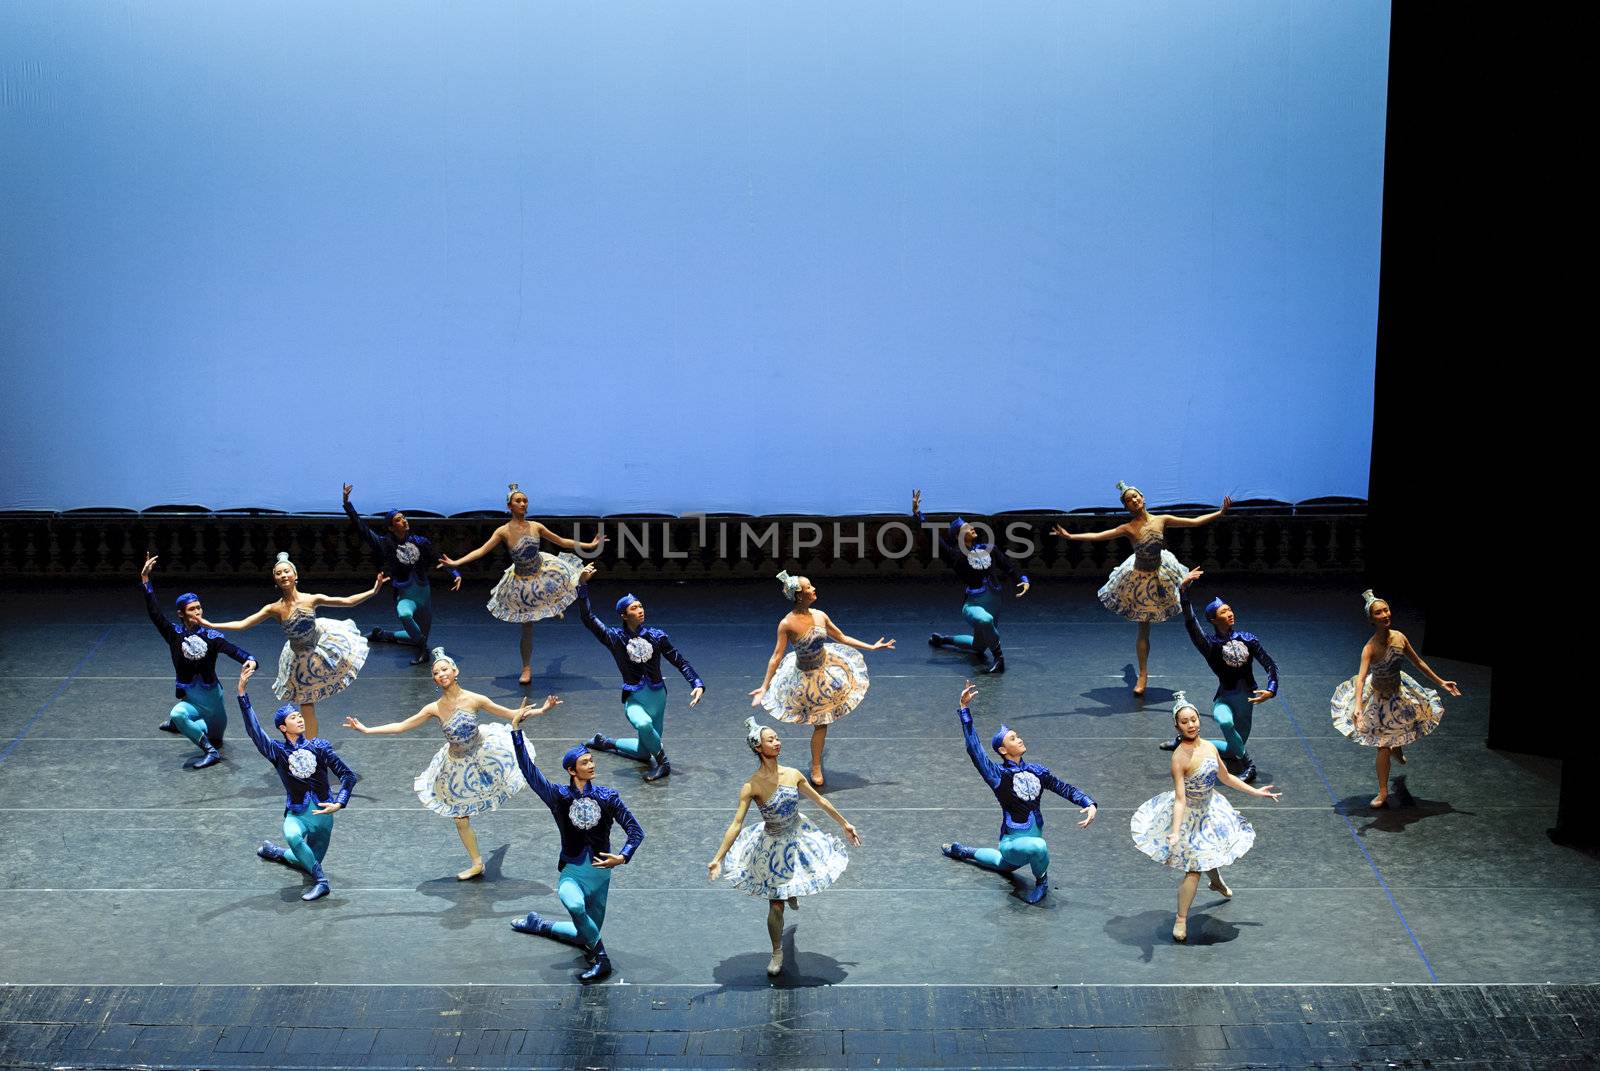 CHENGDU - JAN 5: The national ballet of china perform on stage at Jincheng theater.Jan 5, 2012 in Chengdu, China.
